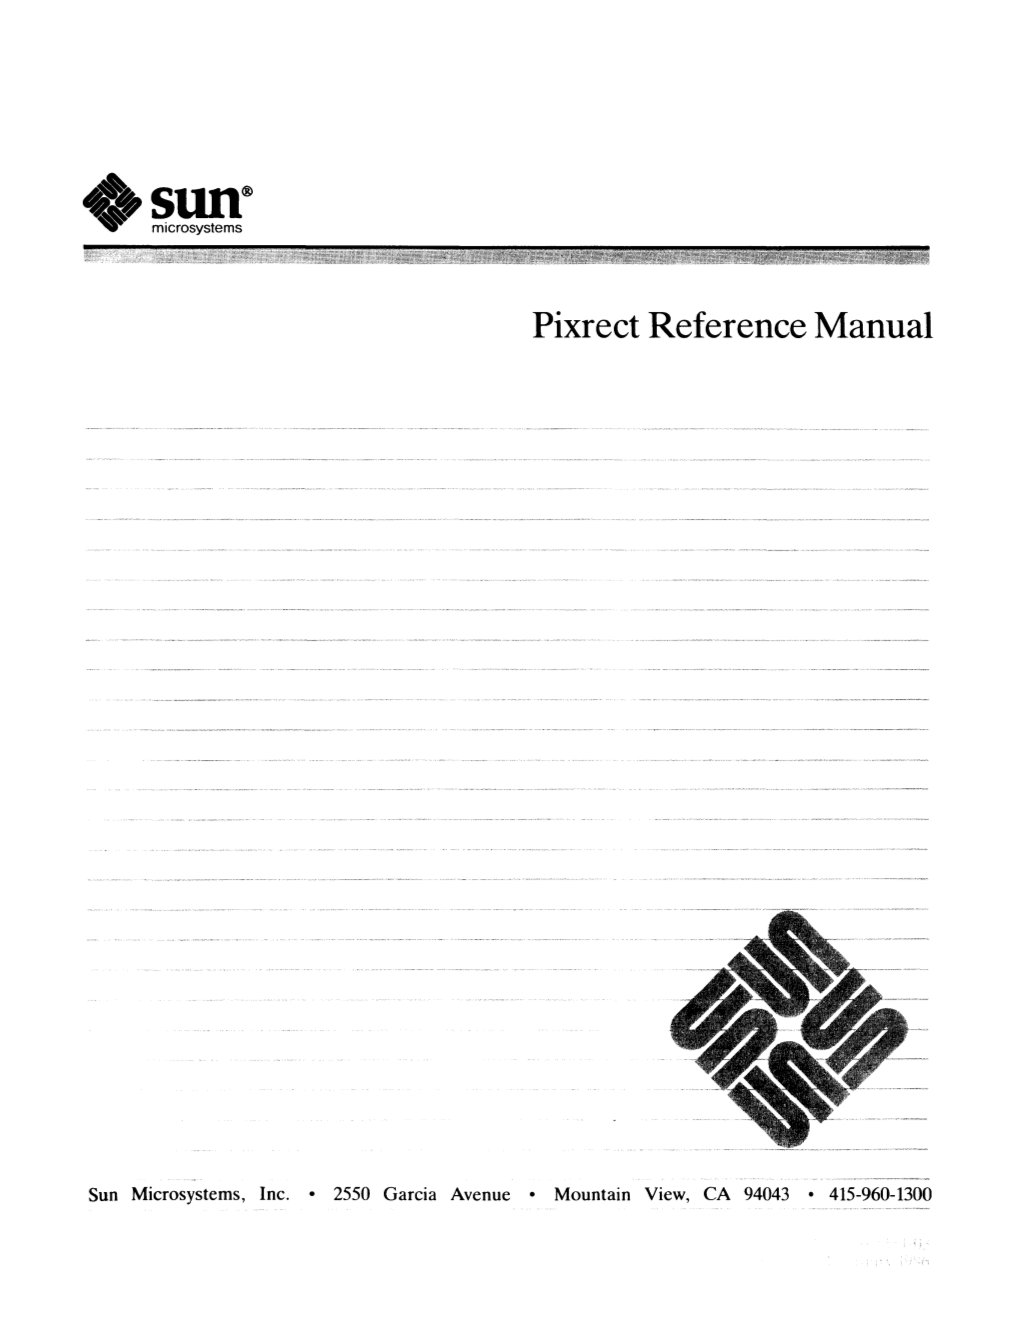 Pixrect Reference Manual